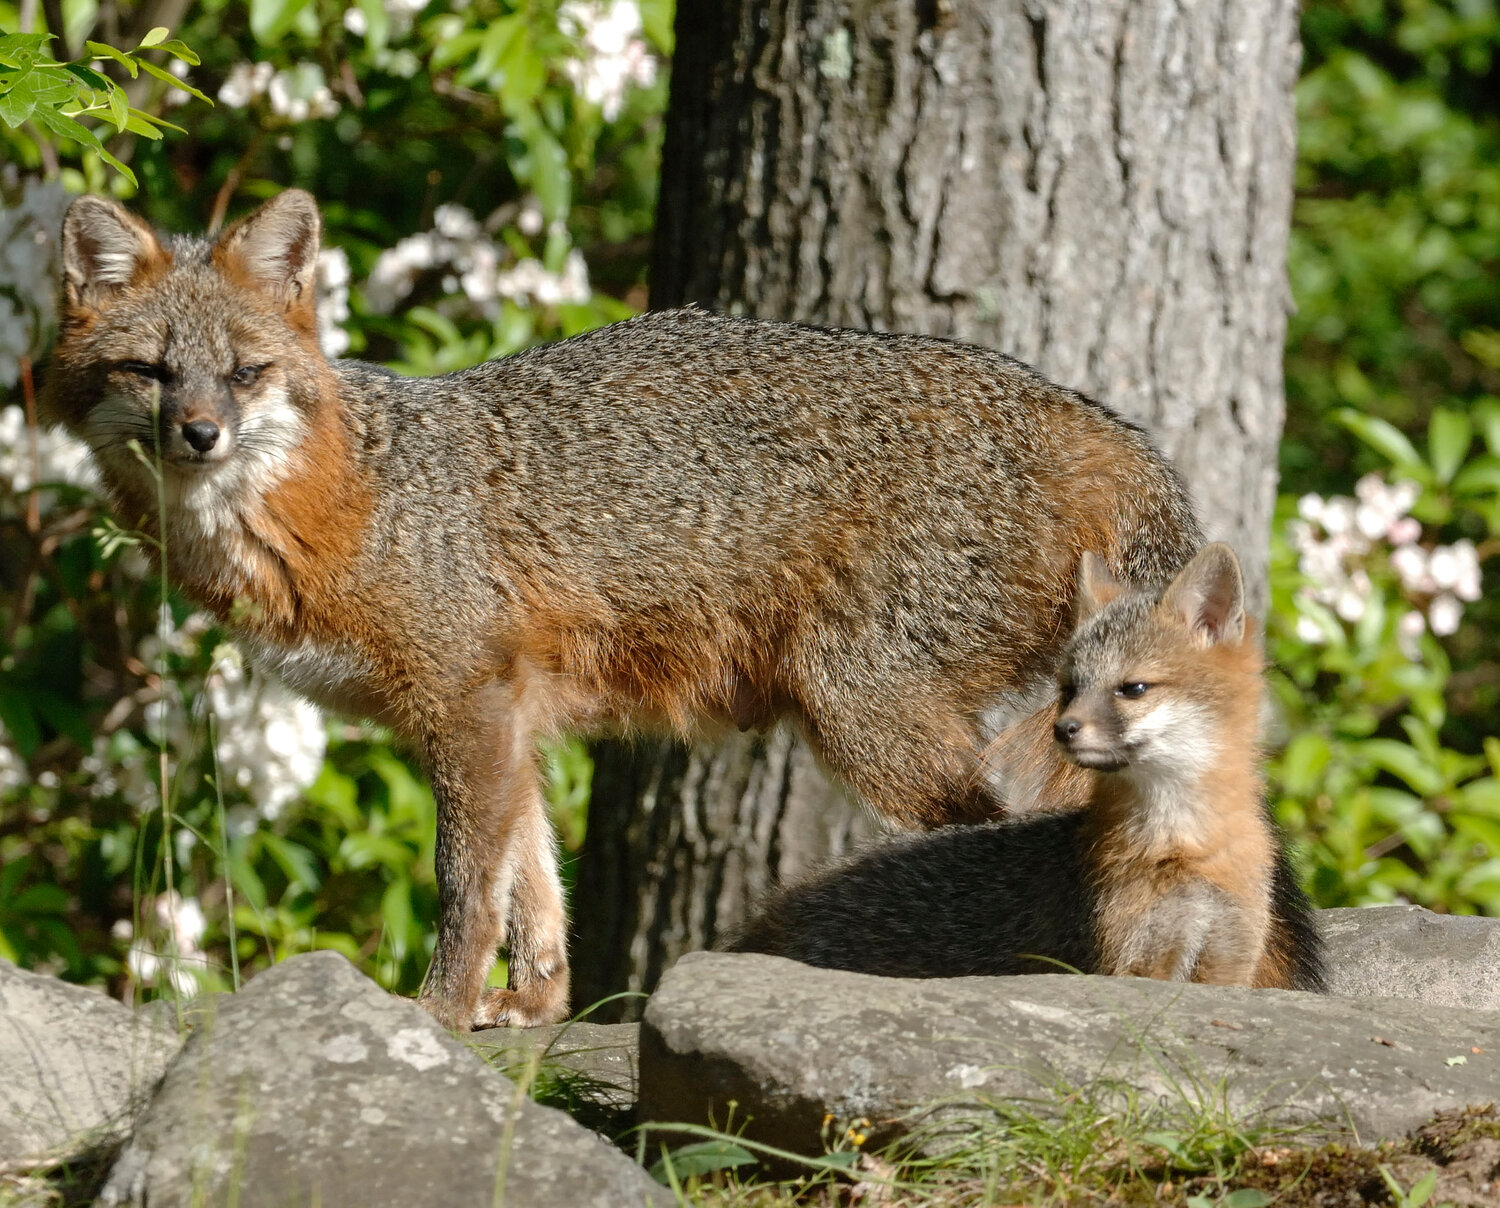 This is a female gray fox and one of three young, which are called kits, near a den in Shohola, PA. The young are born in March and April, and usually emerge out of the den 10 weeks later. The kits can frequently be seen playing together near the den. The family will stay together during the summer; it disperses when fall arrives.